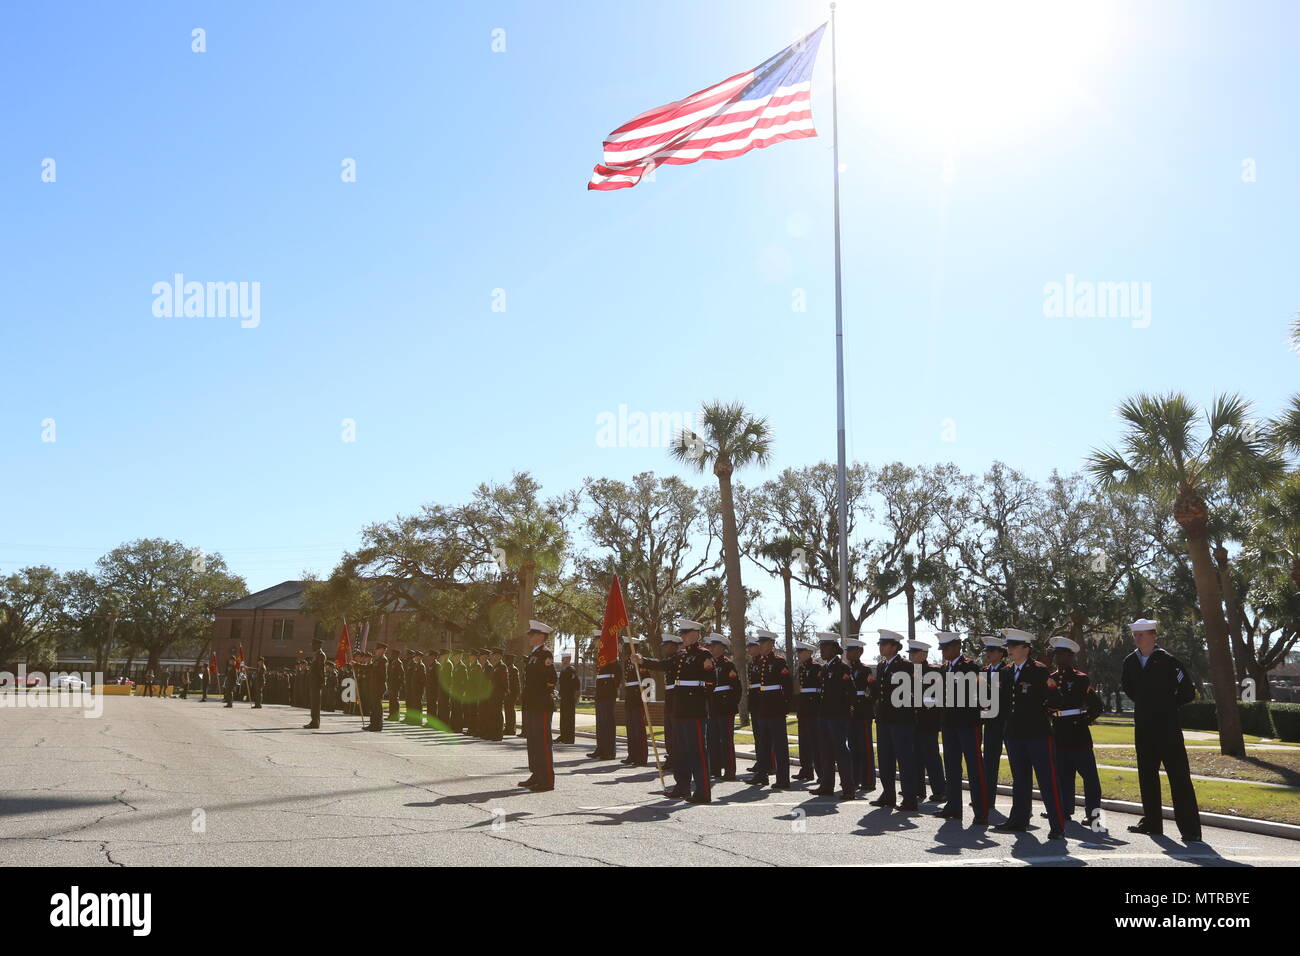 U.S. Marines stationed on Marine Corps Recruit Depot Parris Island (MCRD PI) stand in formation during a relief and appointment ceremony at the General’s Building on MCRD PI, S. C., Jan. 13, 2017. Sgt. Maj. Angela M. Maness retired after 30 faithful years of service and was relieved of her duty as MCRD PI/Eastern Recruiting Region Sergeant Major by Sgt. Maj. Rafael Rodriguez. (U.S. Marine Corps photo by Lance Cpl. Colby Cooper/released) Stock Photo